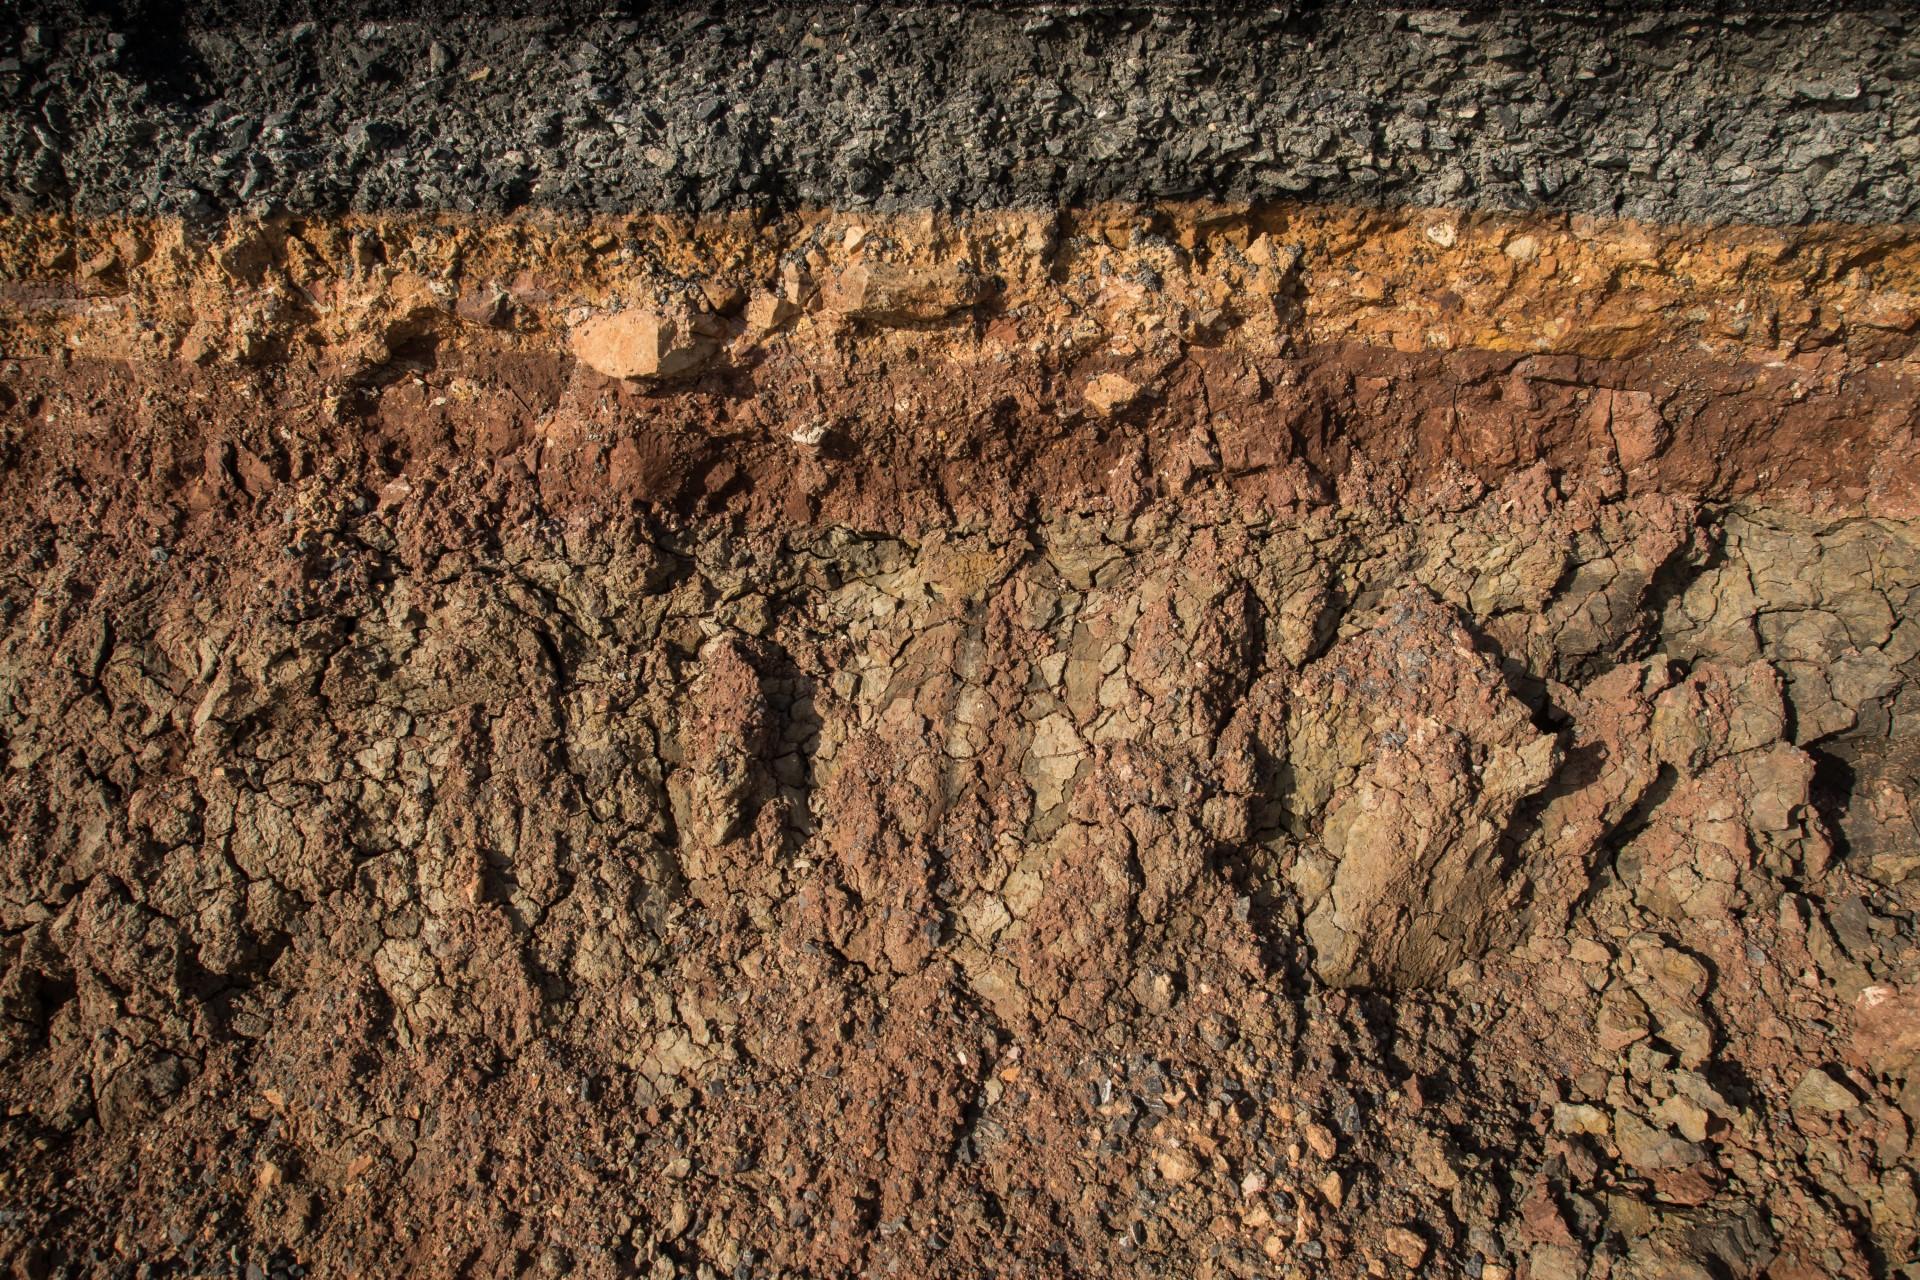 Soil and rock layer